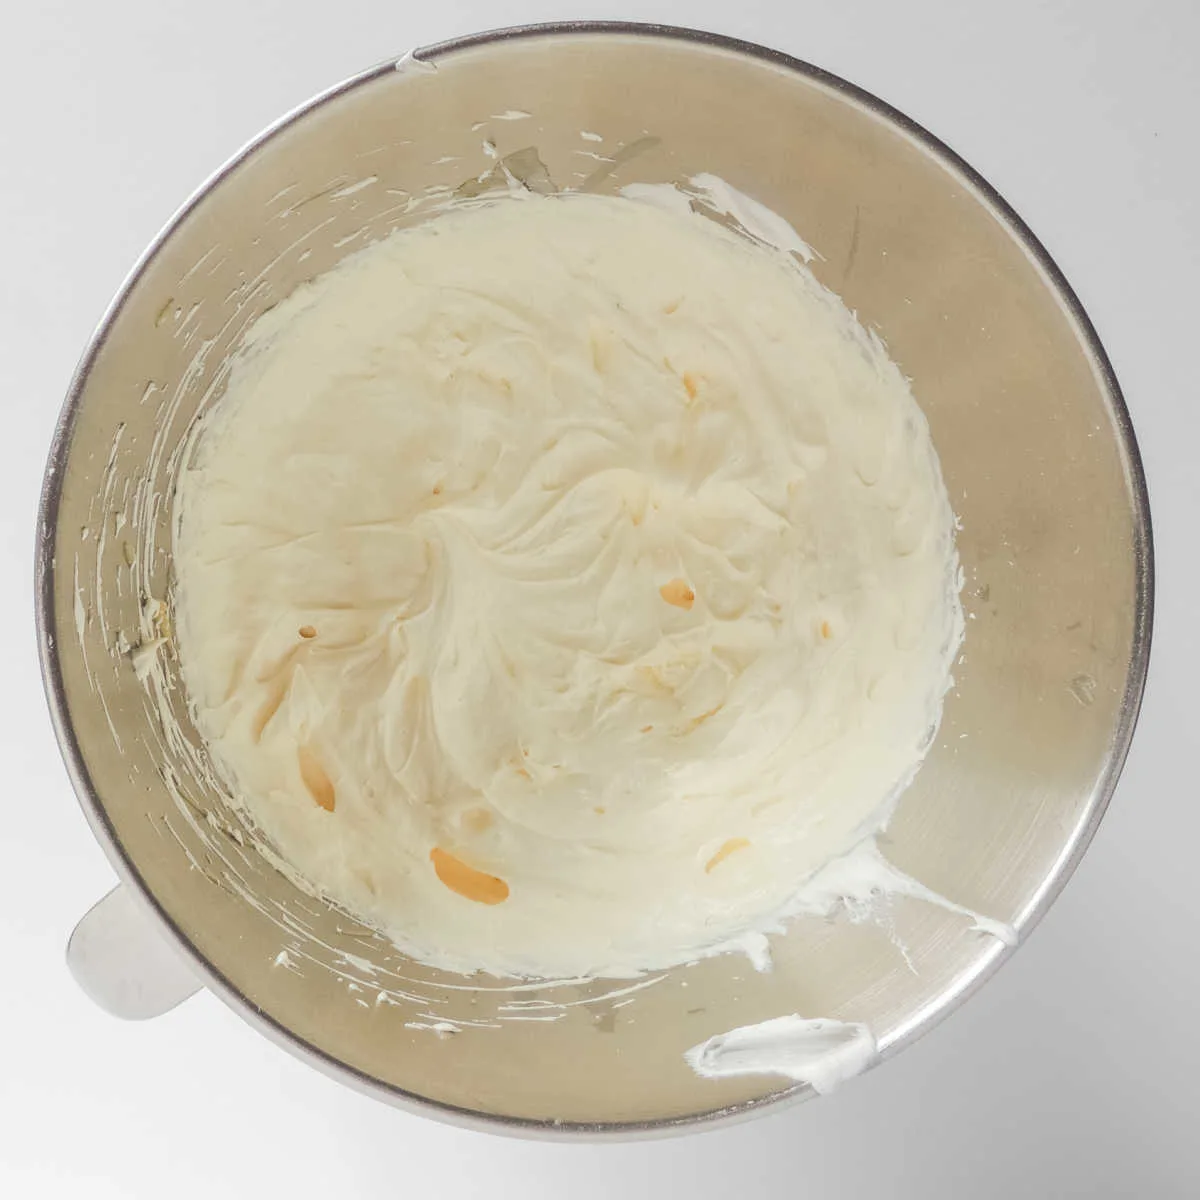 Pudding and whipped topping mixing bowl, ready to be used.